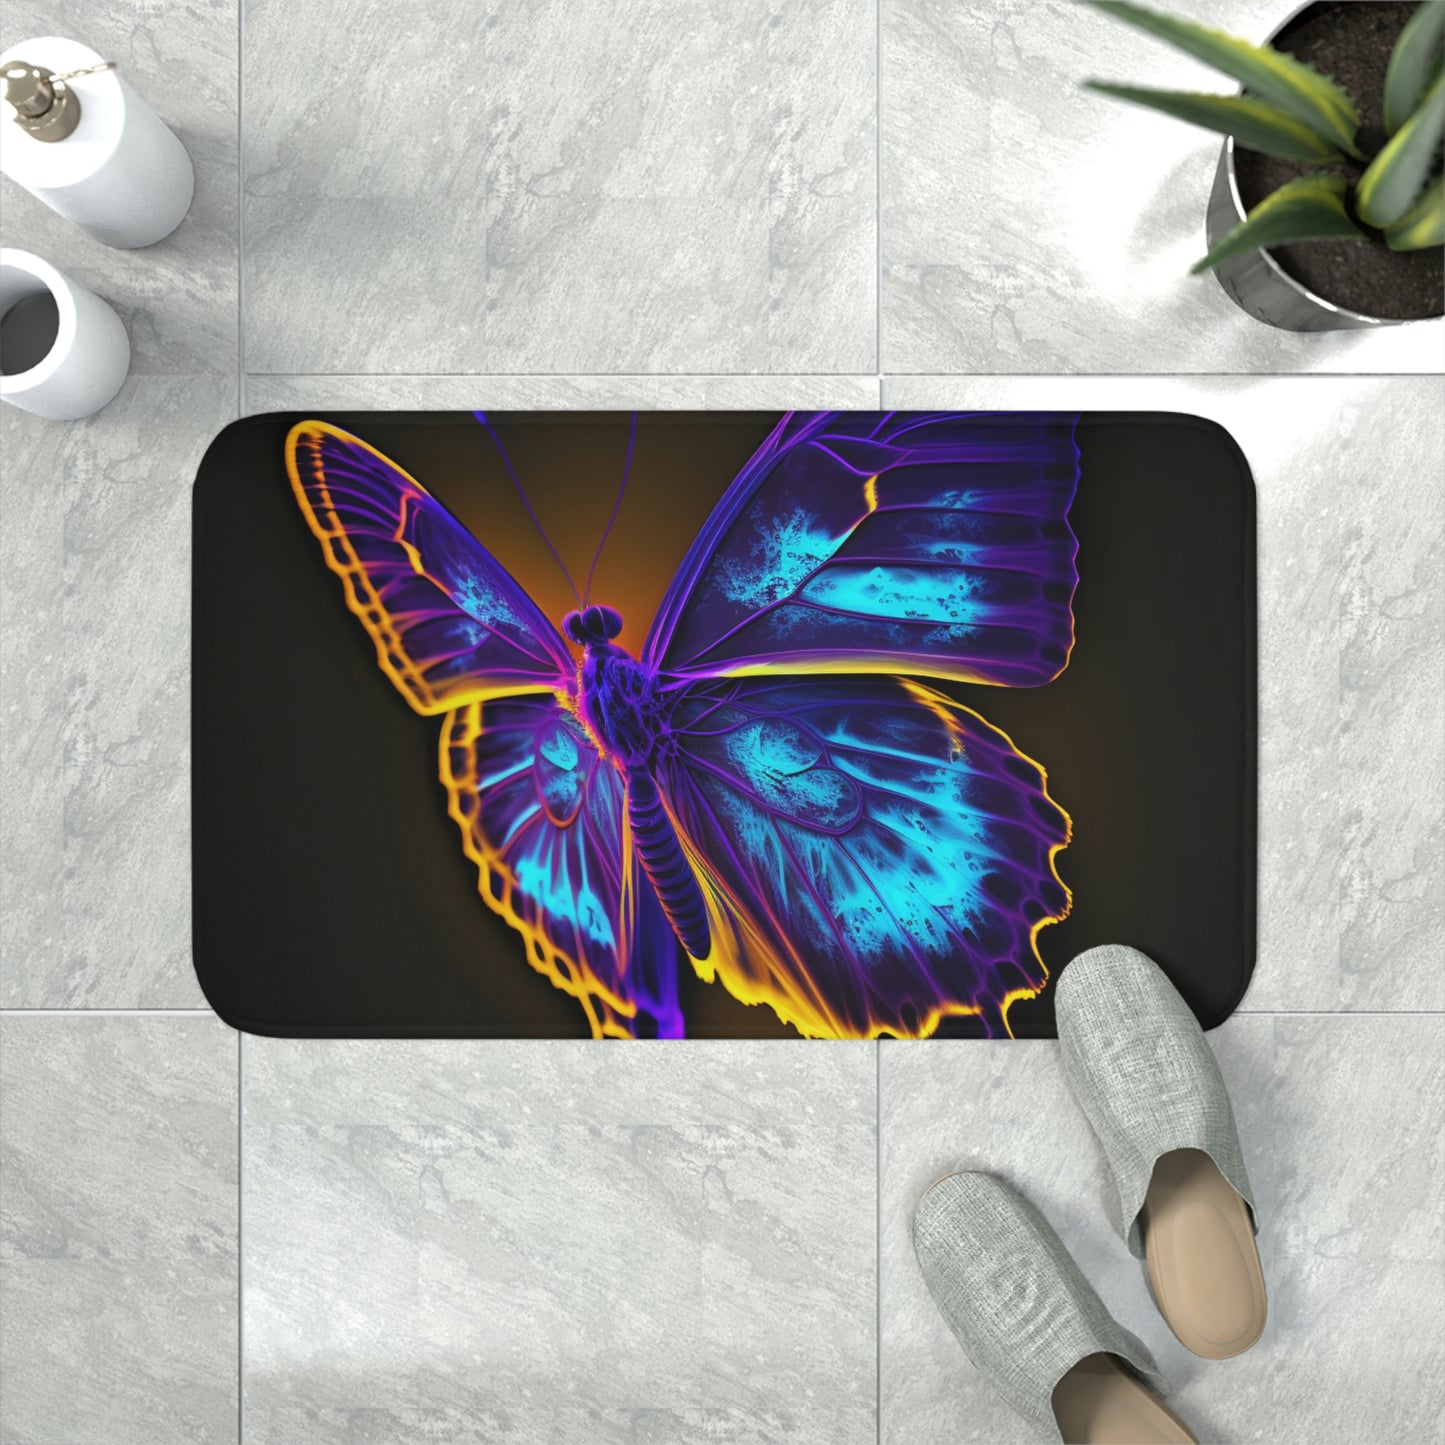 Thermal butterfly 4